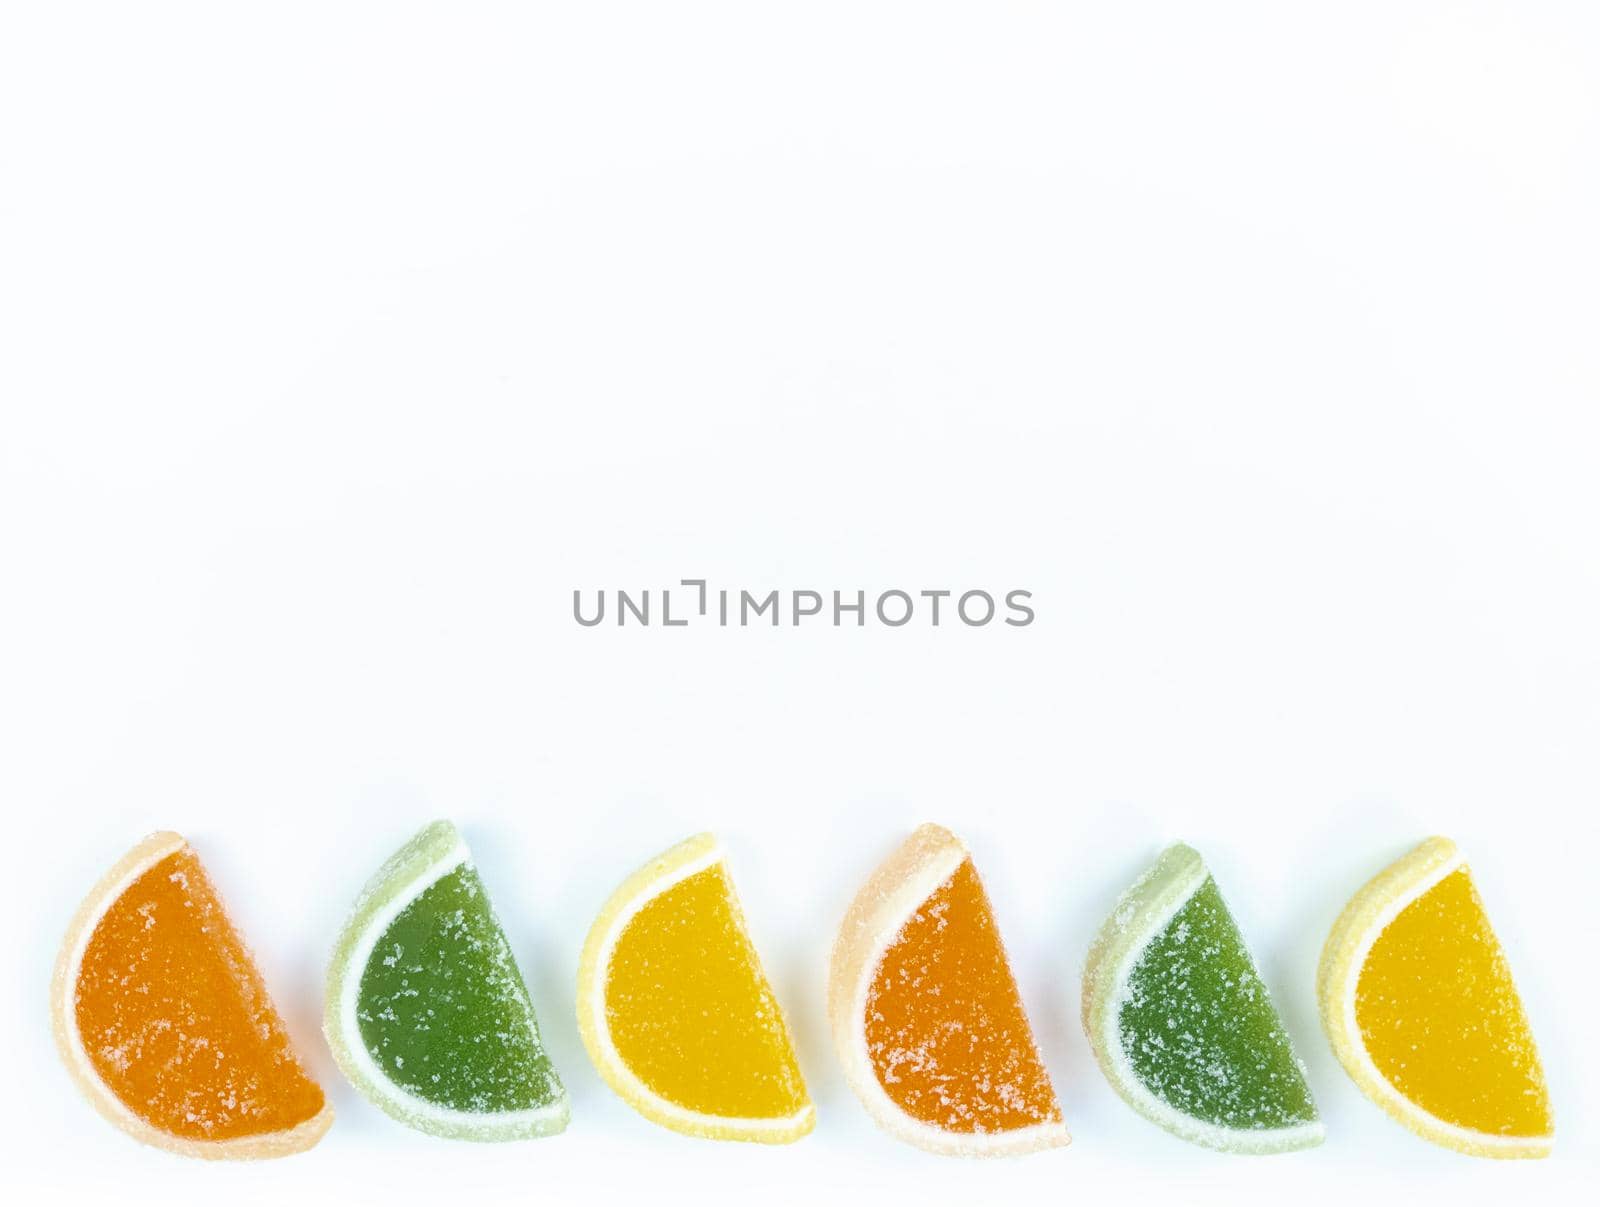 Multicolored marmalade citrus slices in sugar on a white background with copy space.